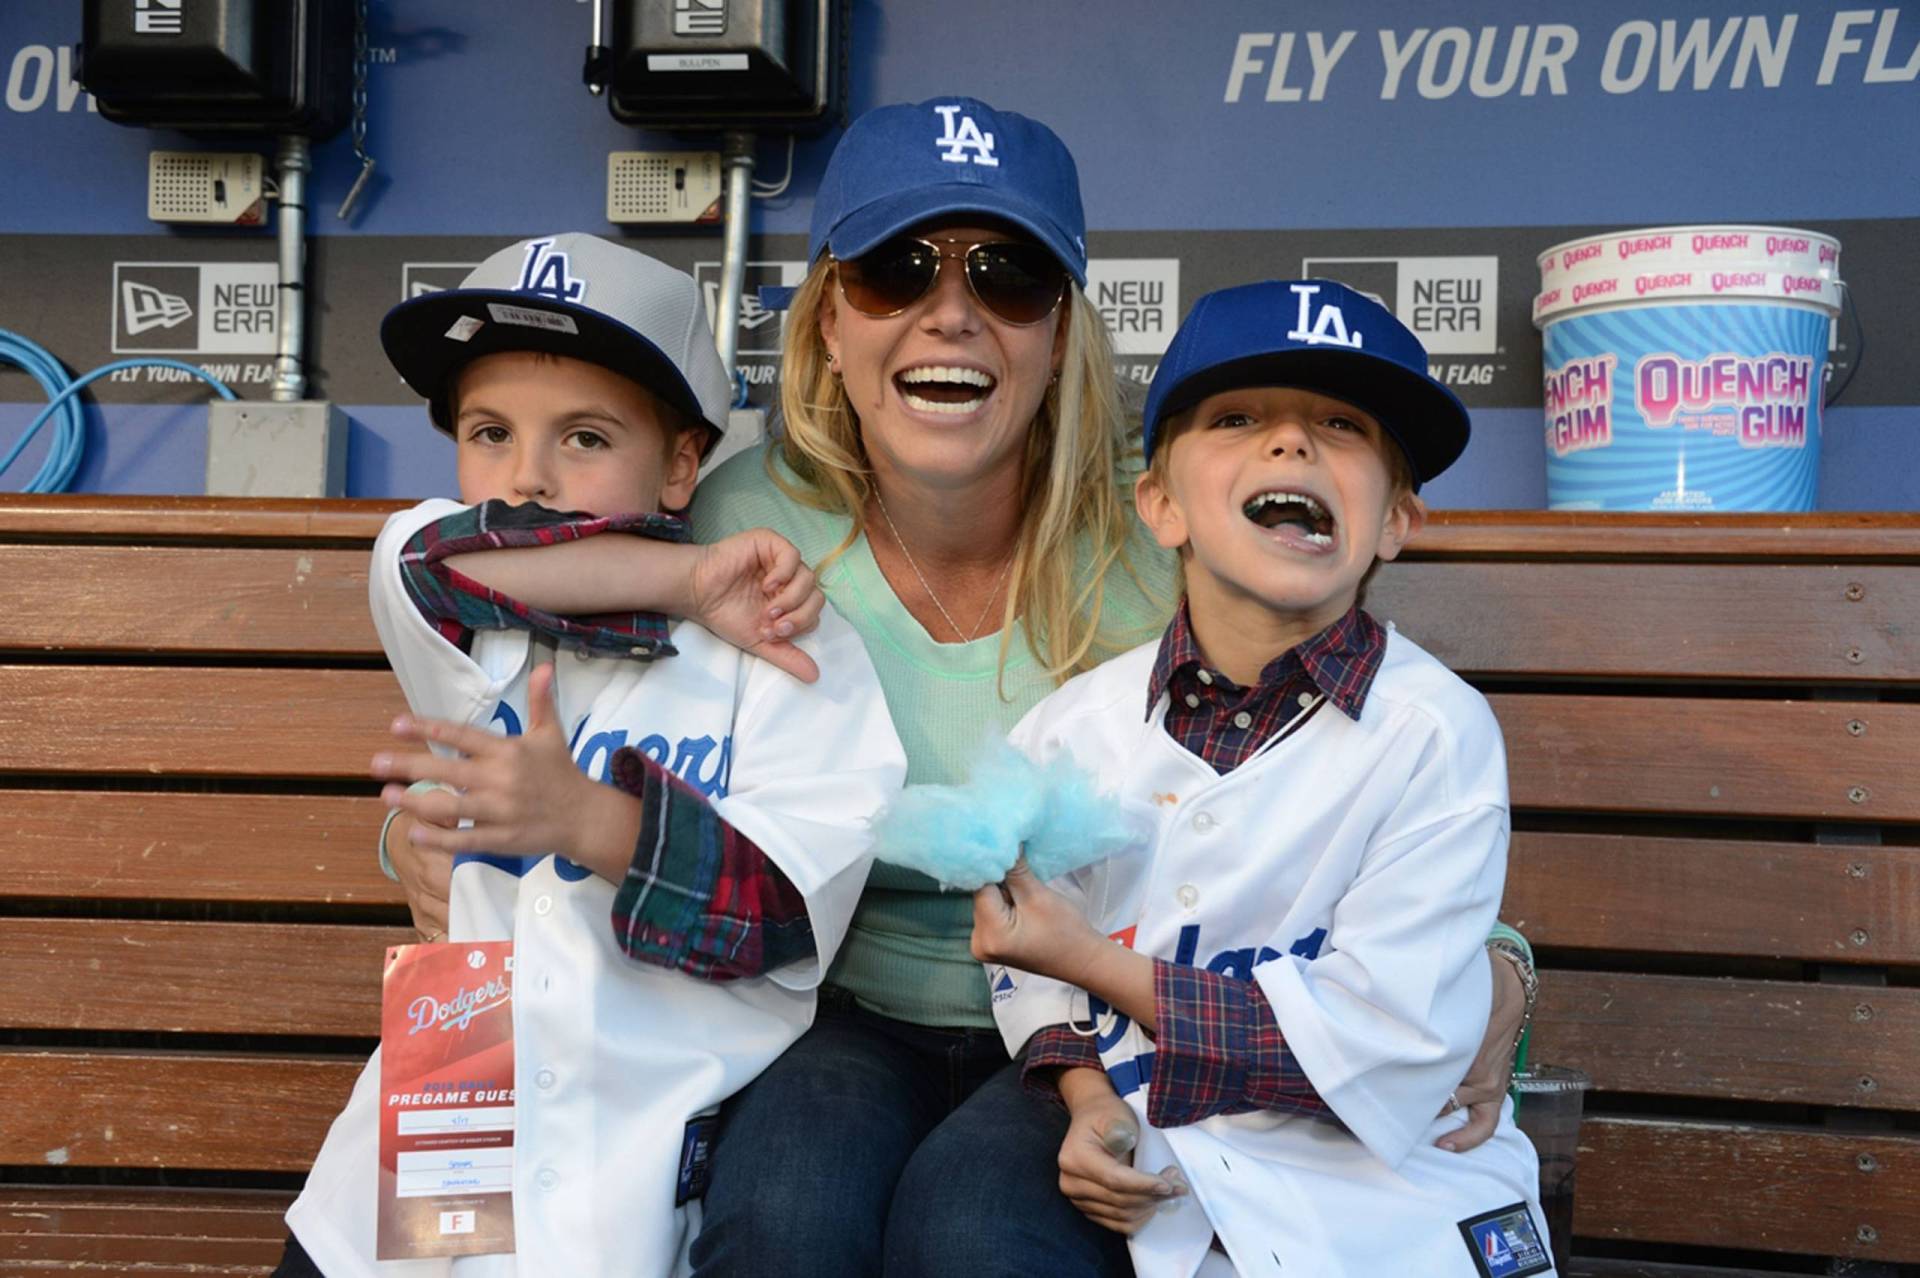 A laughing young woman wearing a green sweater and an blue LA baseball cap embraces two young boys. The children are wearing LA Dodgers jerseys and baseball caps.